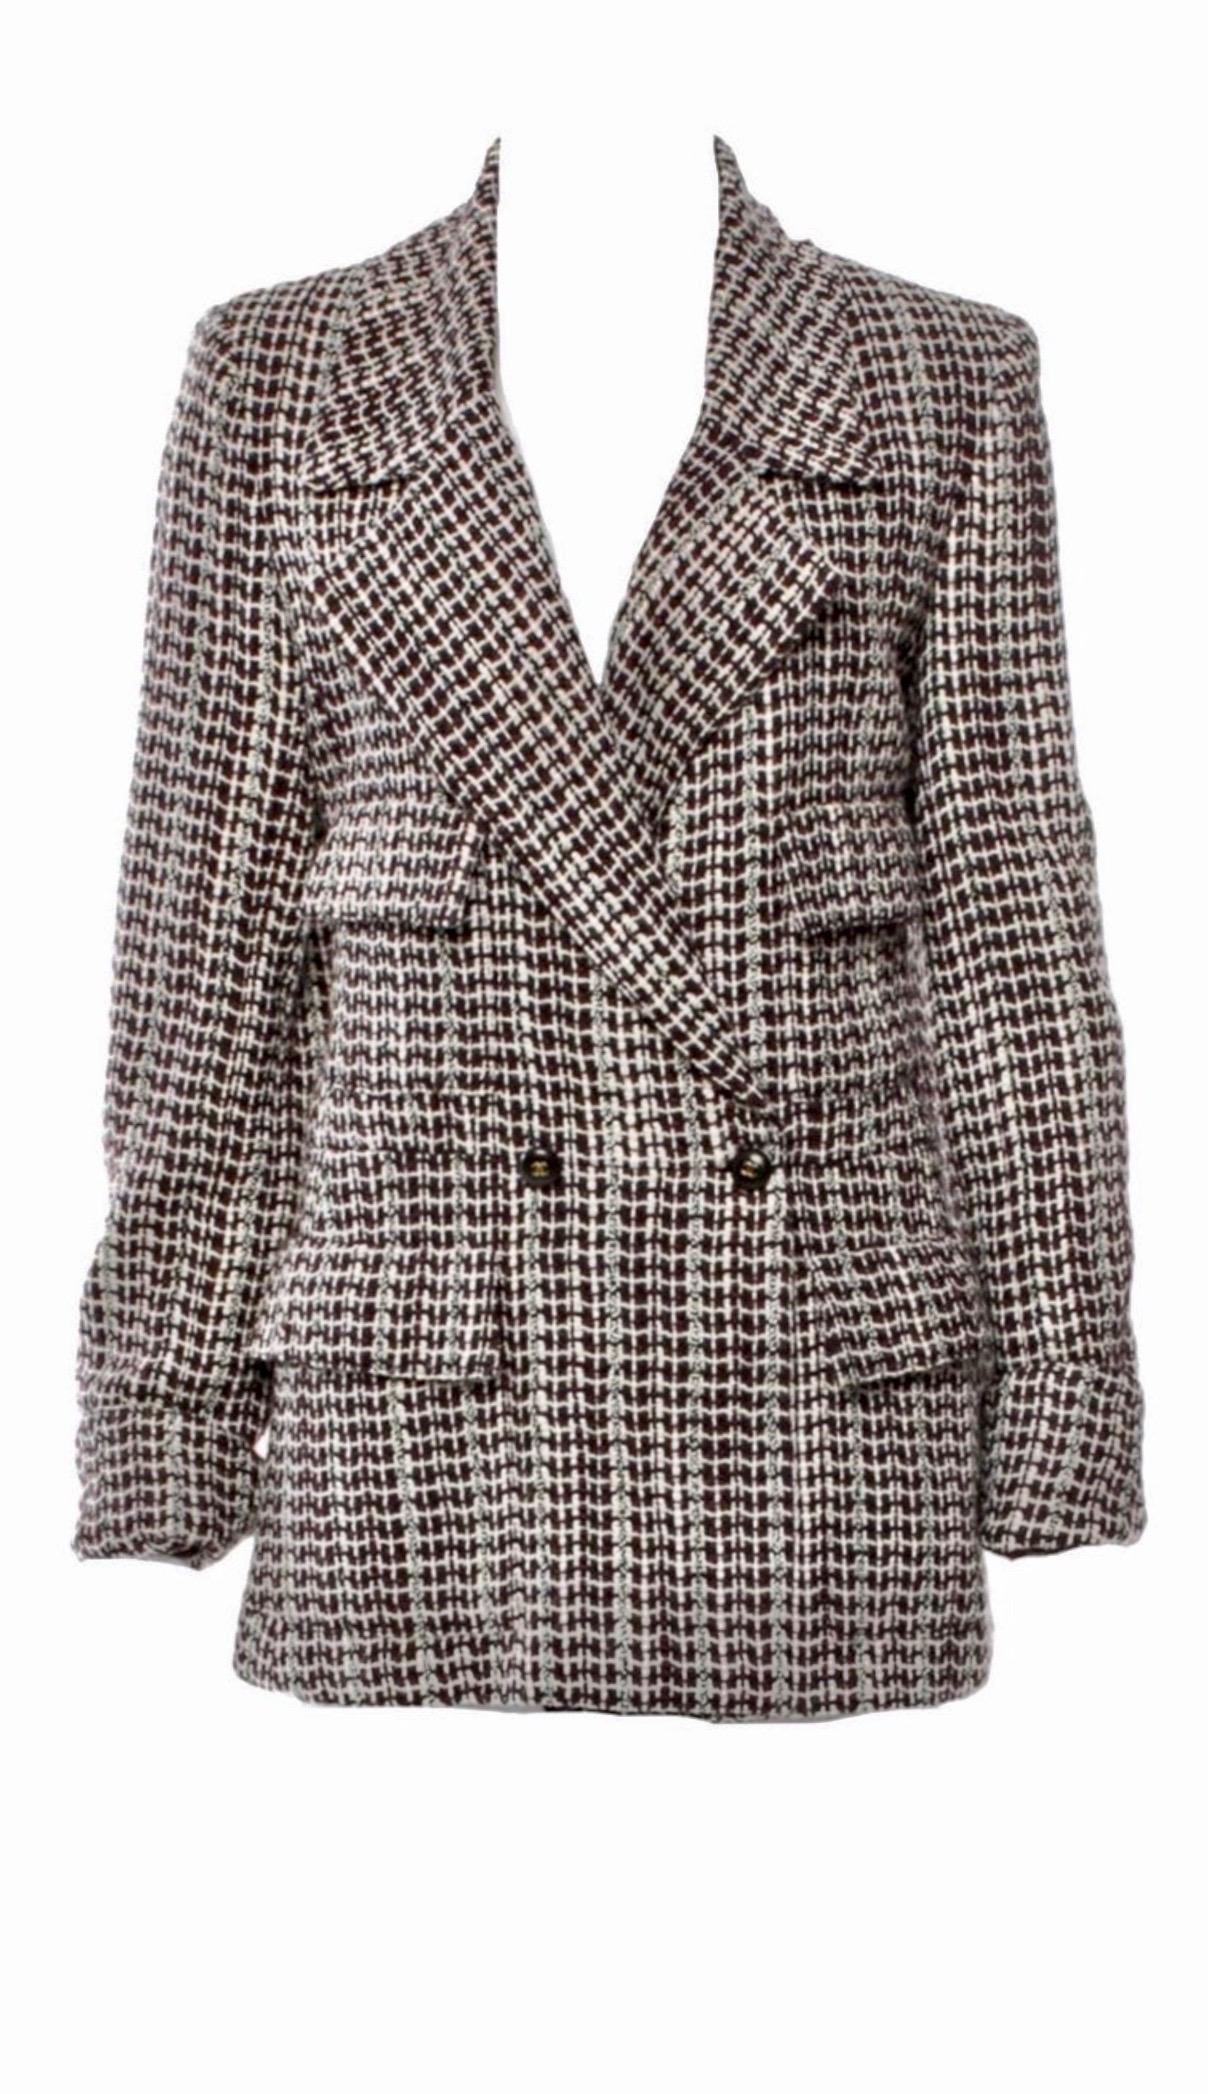 Beautiful CHANEL tweed coat jacket
A true CHANEL signature item that will last you for many years
Stunning colors 
A truly versatile piece, can be worn as blazer, jacket or short coat
Four front pockets
Famous CHANEL Lesage fantasy tweed